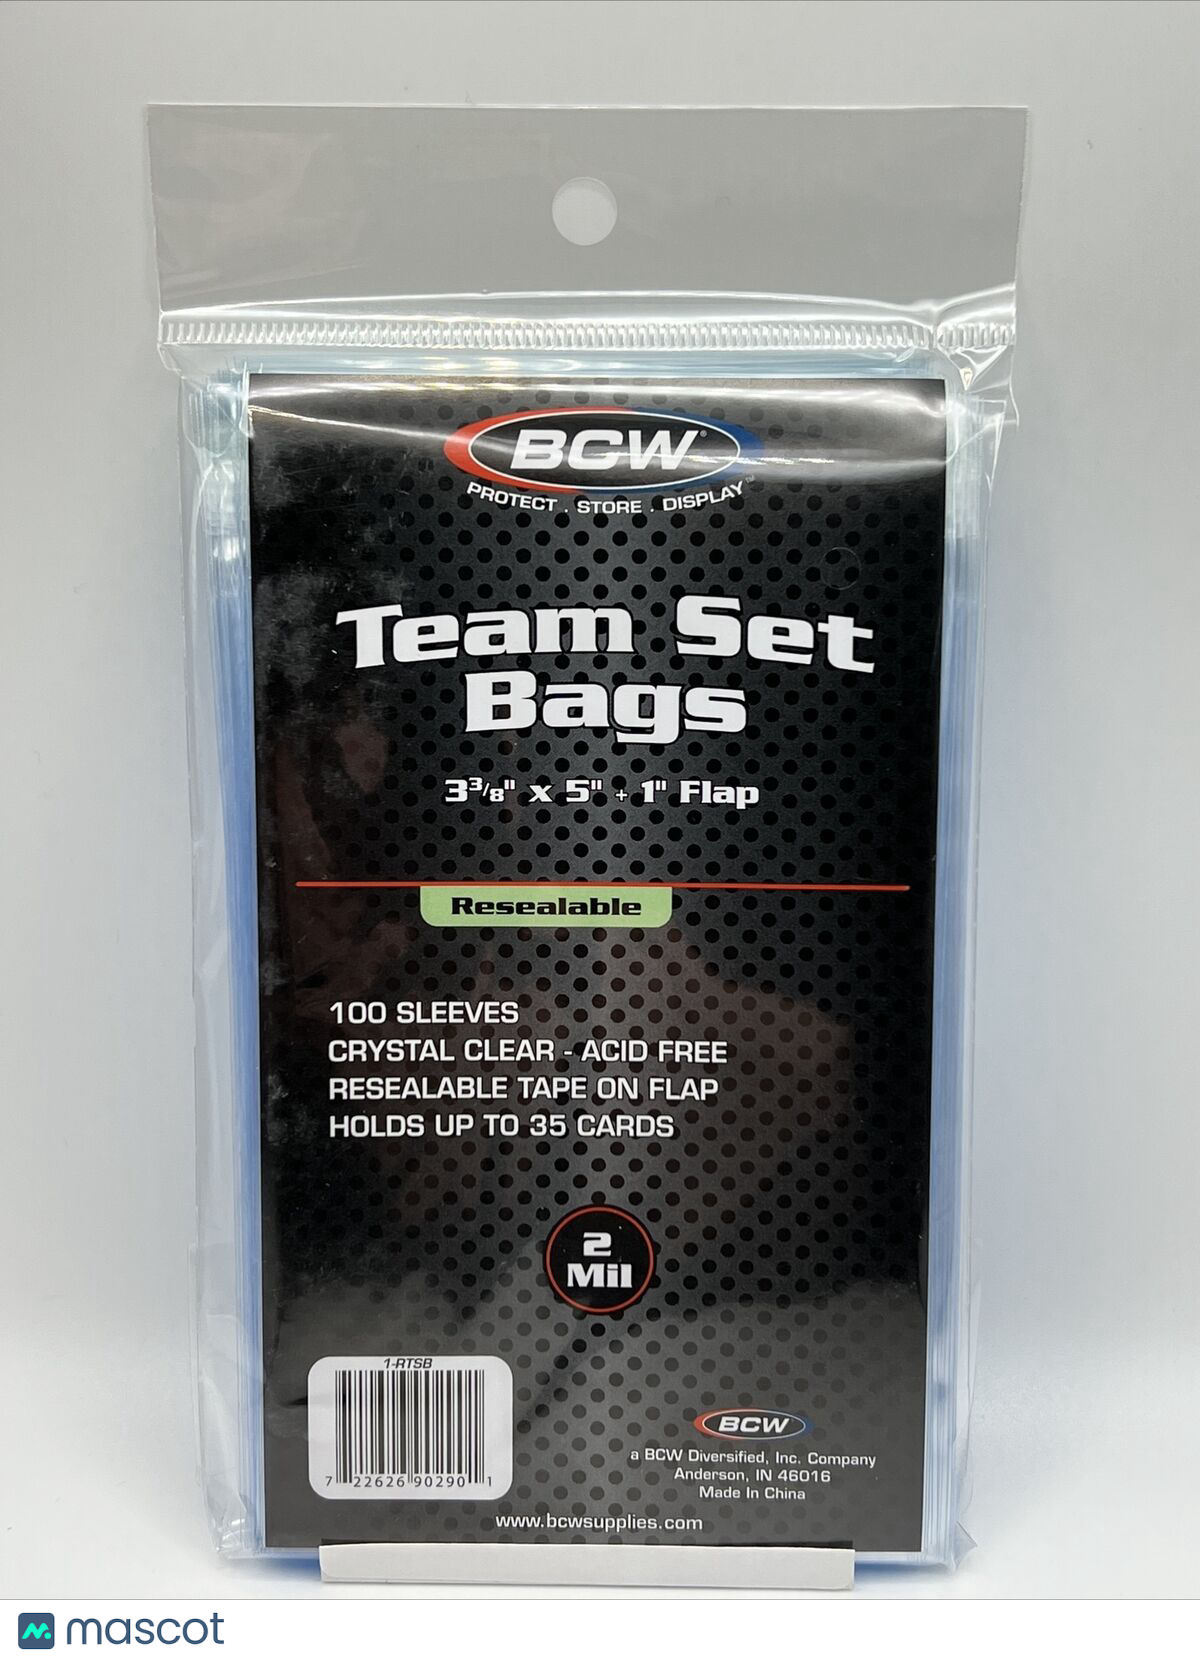 BCW Resealable Team Set Bags 1 Pack of 100 Sleeves Holds Up to 35 Cards